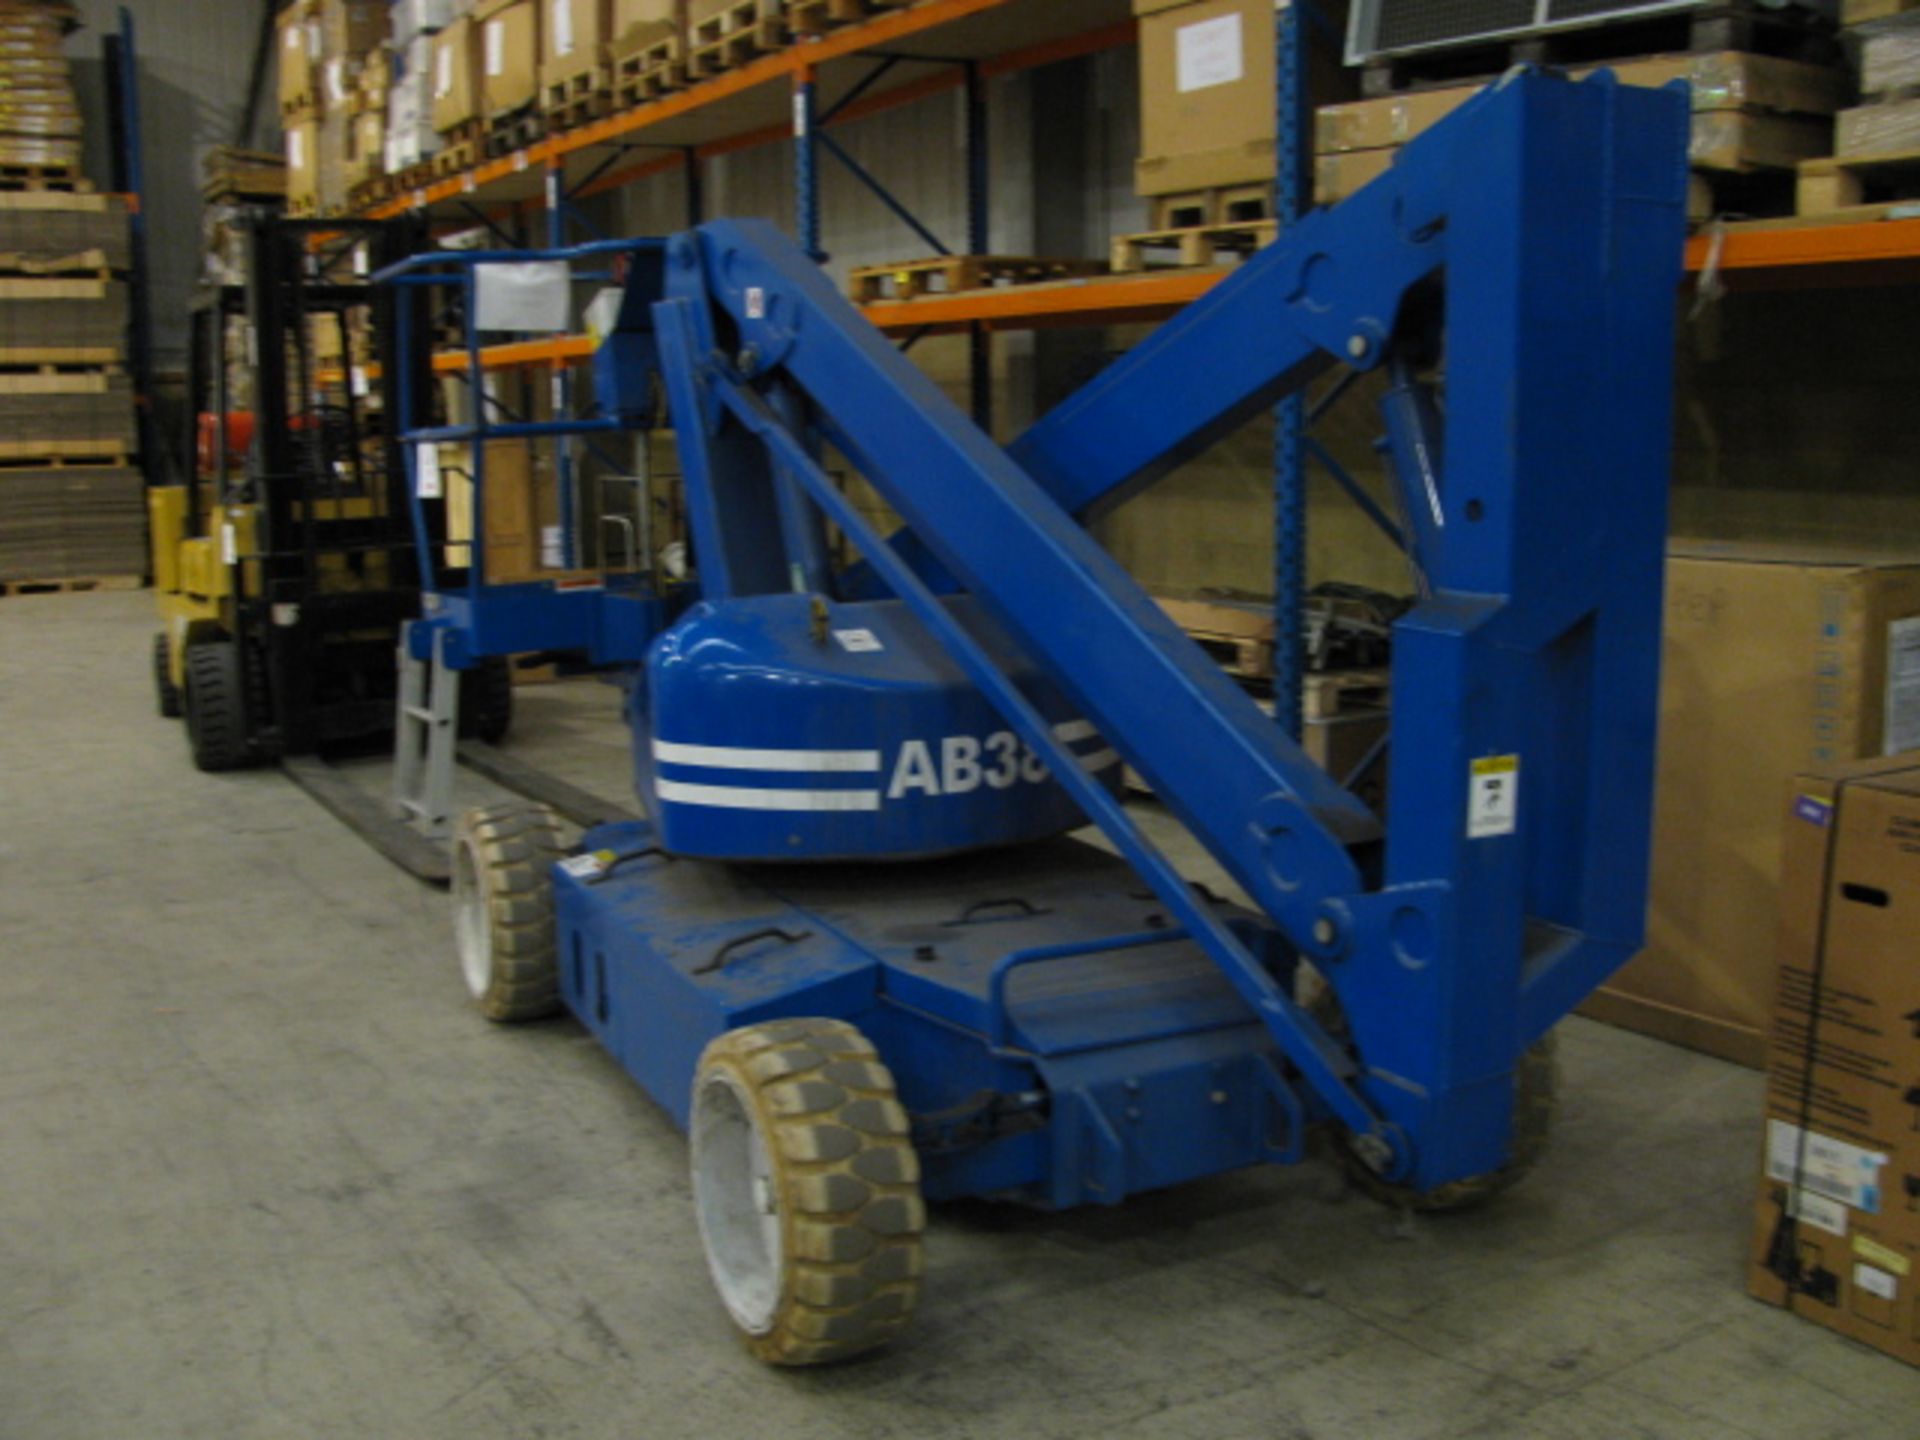 Upright AB38 telescopic manual hoist, serial no. 1997/2000, platform height 11.5m. Please note: this - Image 2 of 5